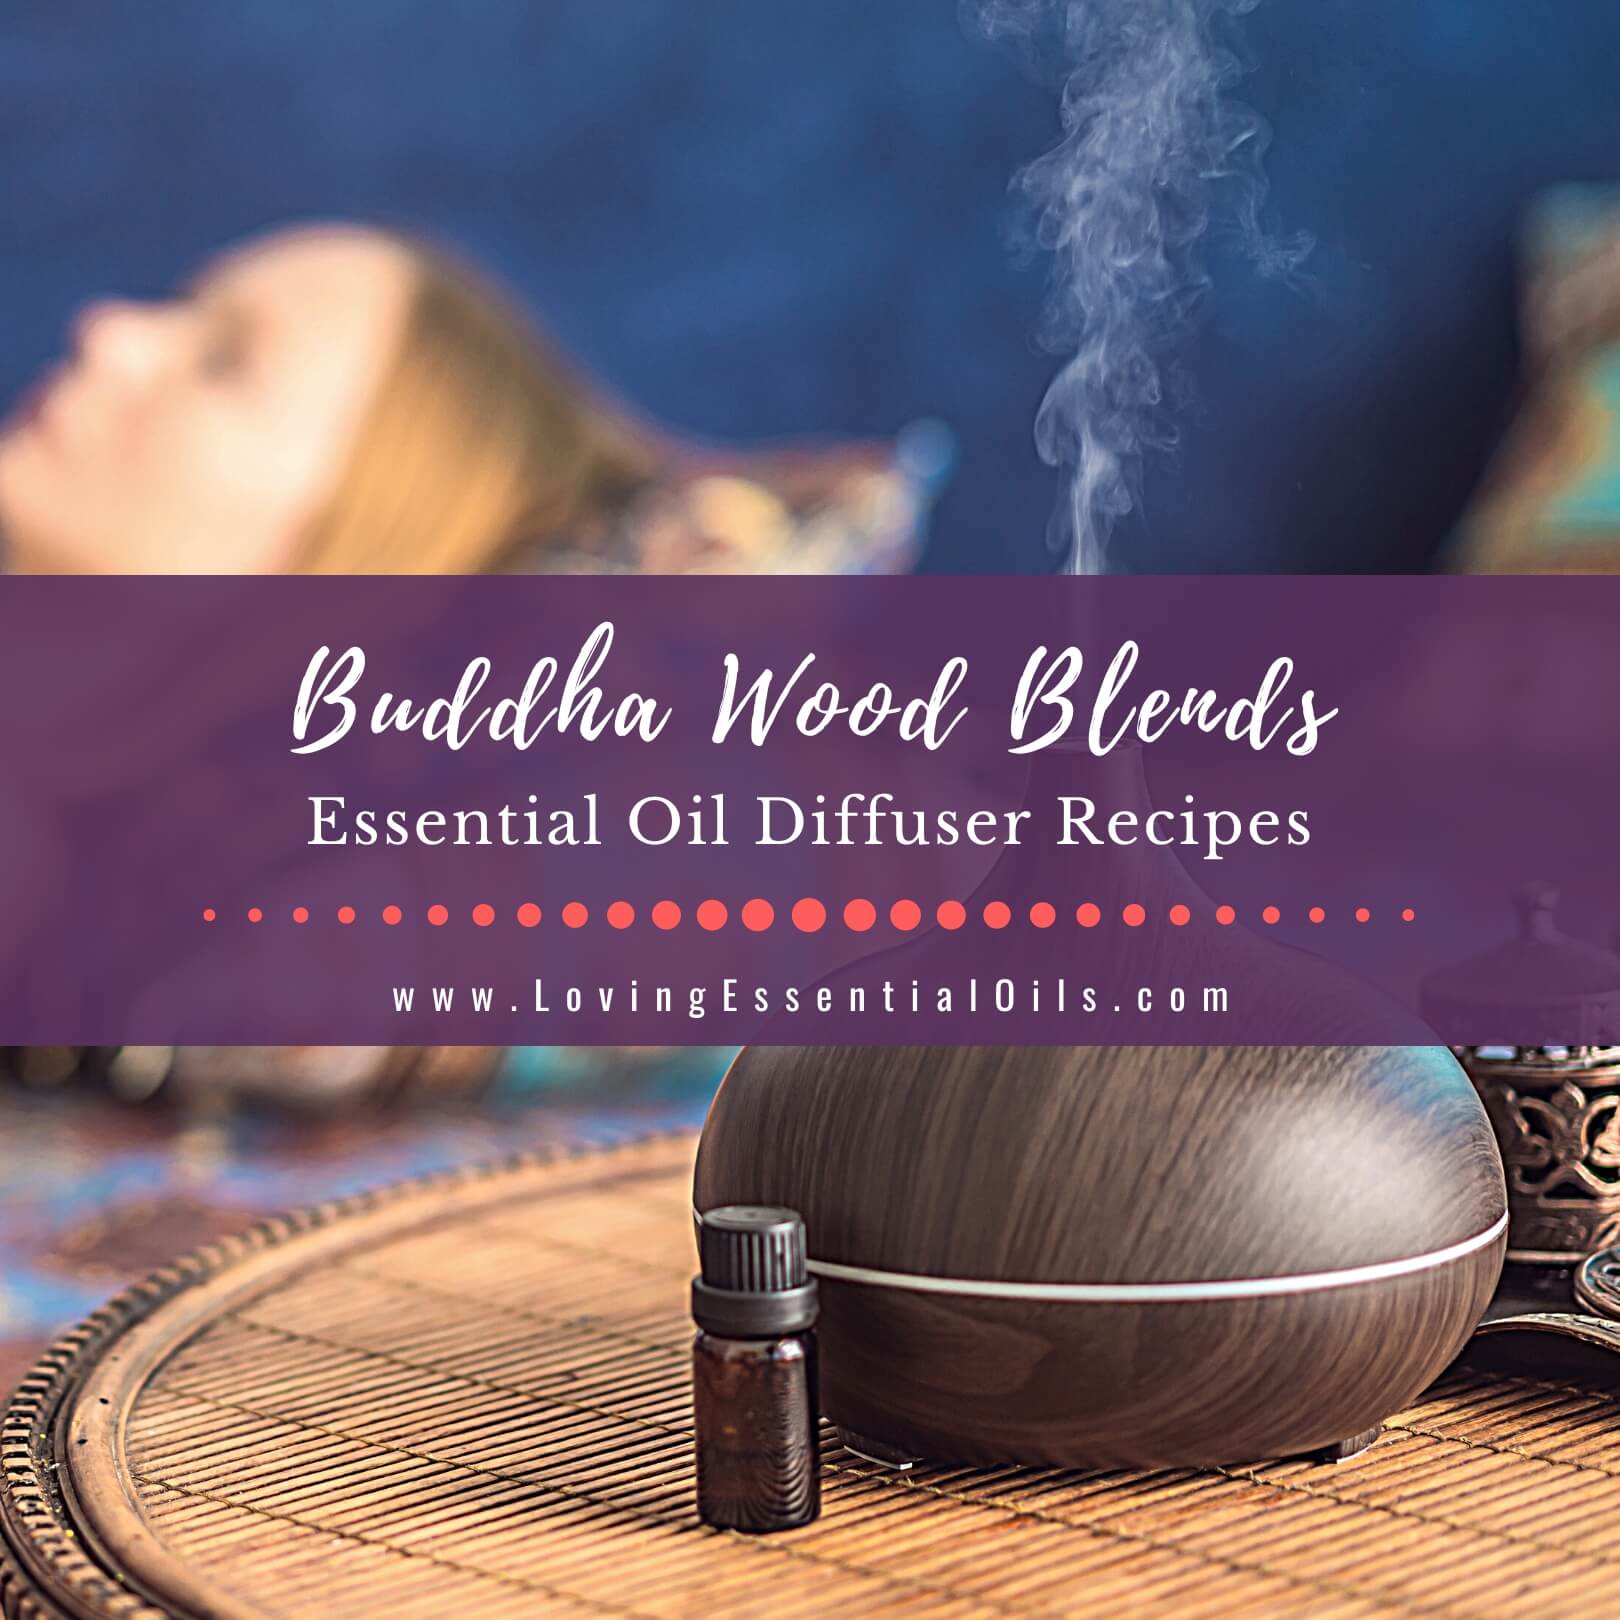 Buddha Wood Diffuser Blends and Essential Oil Recipes by Loving Essential Oils